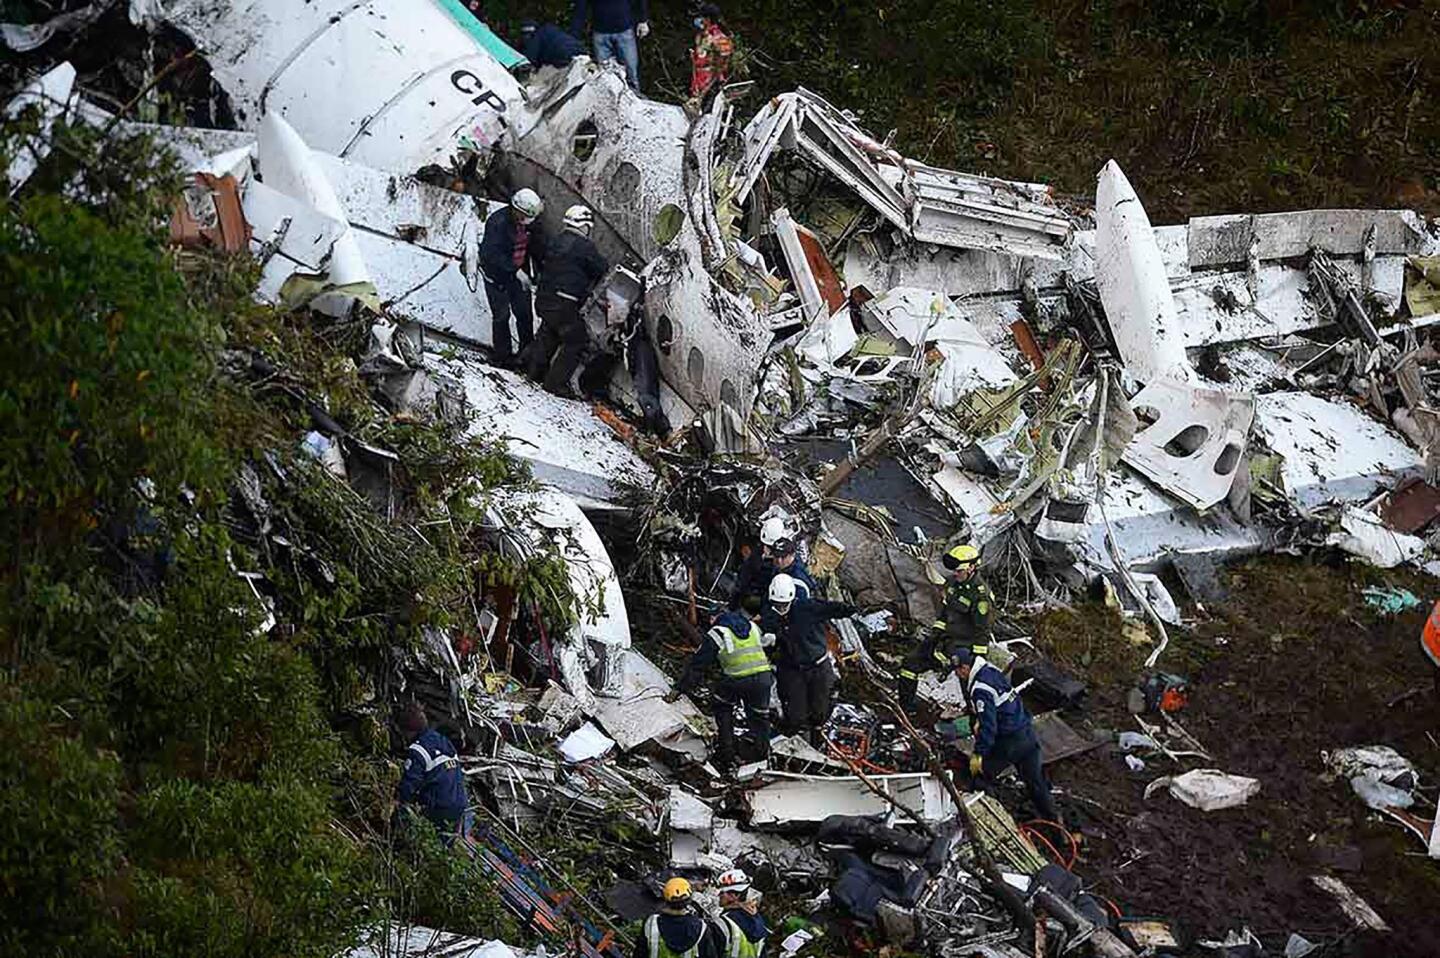 Rescuers search for survivors from the wreckage of the LaMia airlines charter plane carrying members of the Chapecoense Real soccer team that crashed in the mountains of Cerro Gordo, in Colombia.